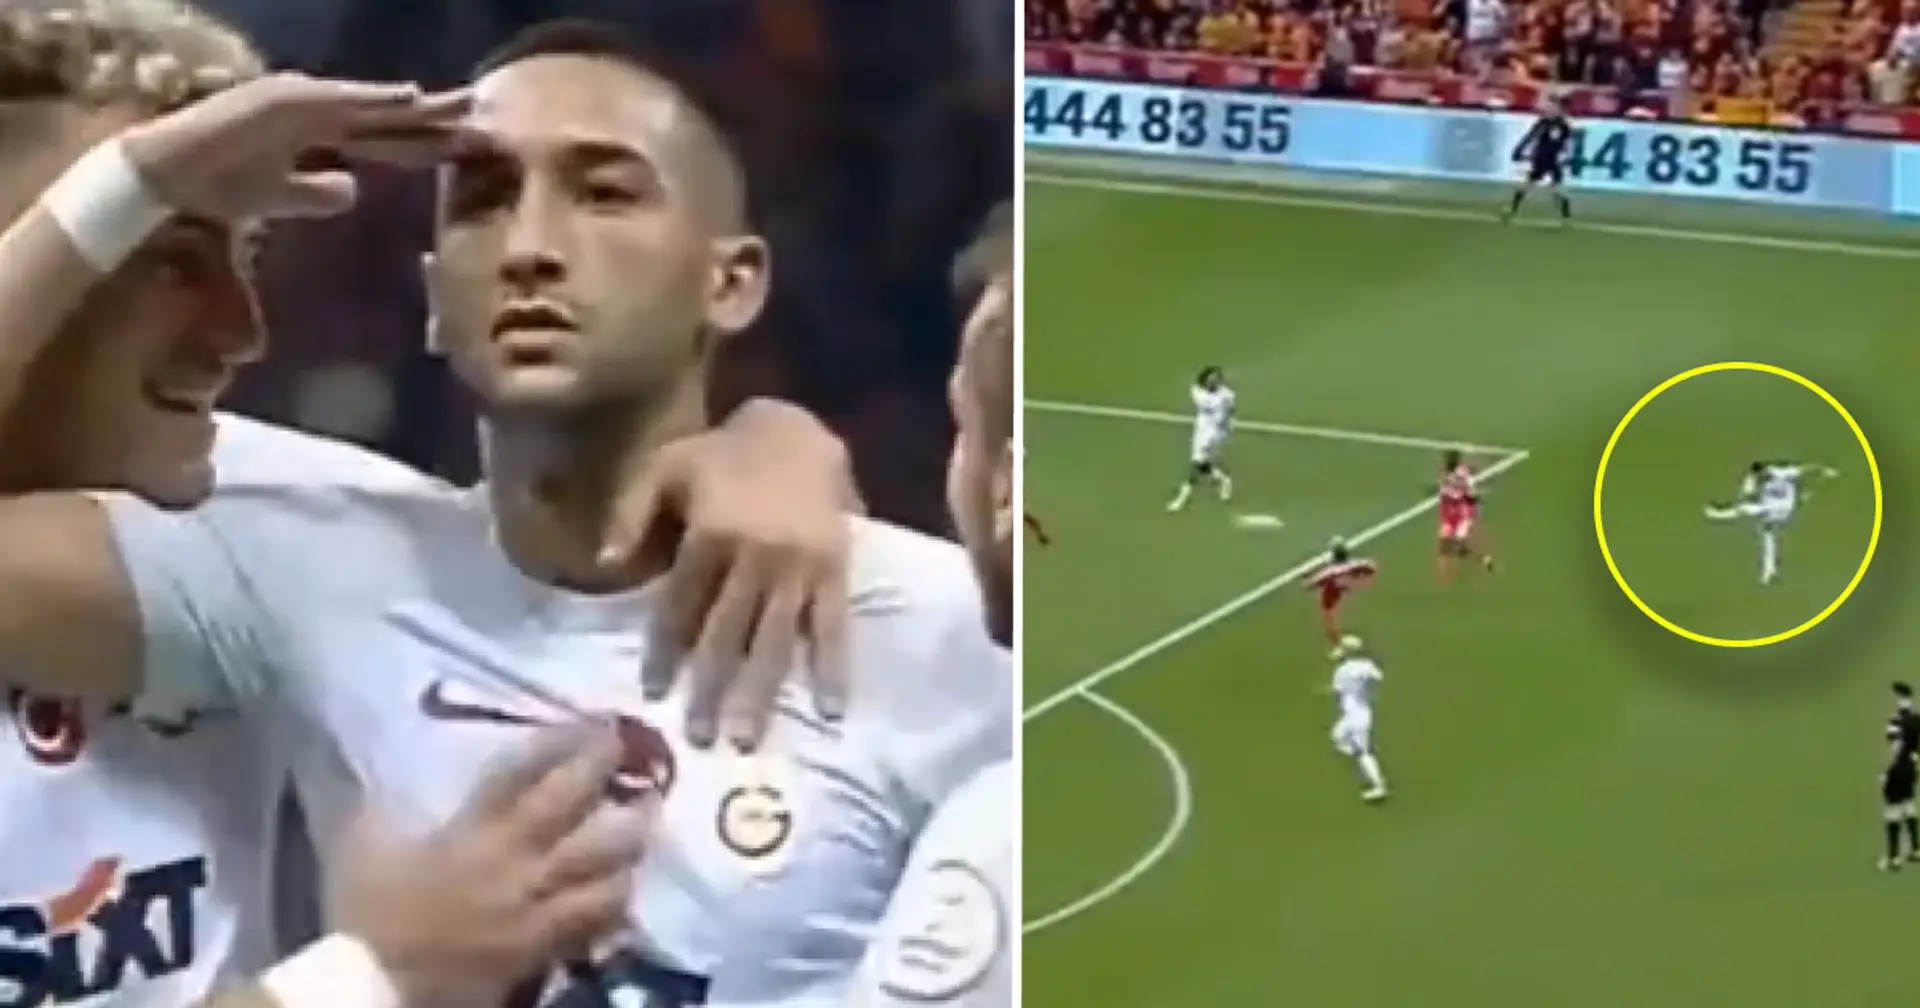 Spotted: Ziyech scores insane goal for new club, he's still a Chelsea player